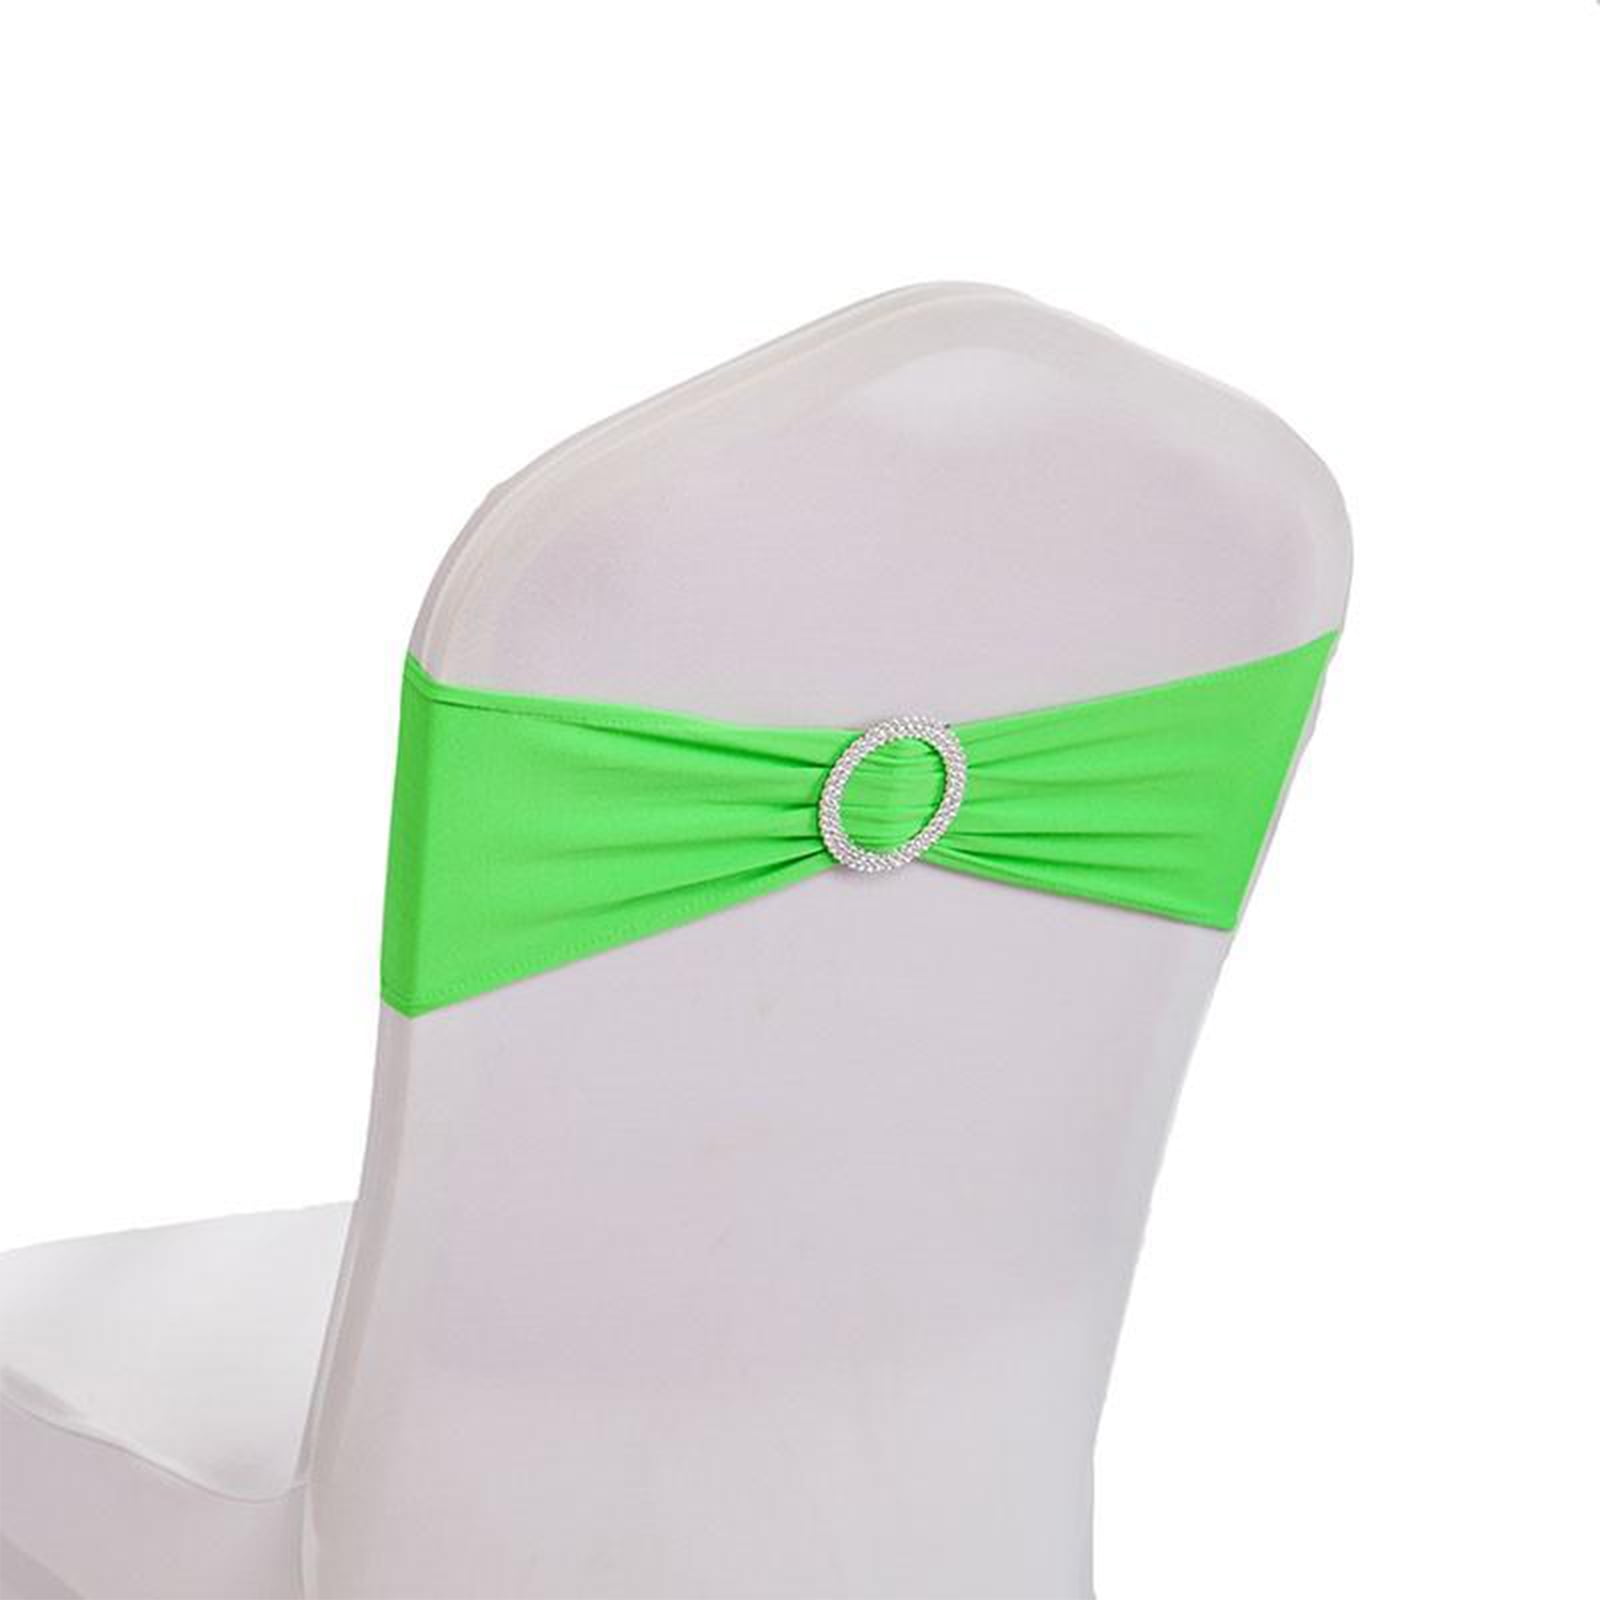 50pcs Spandex Chair Cover Bands Sashes Wedding Decor Event Banquet Stretc Gift 